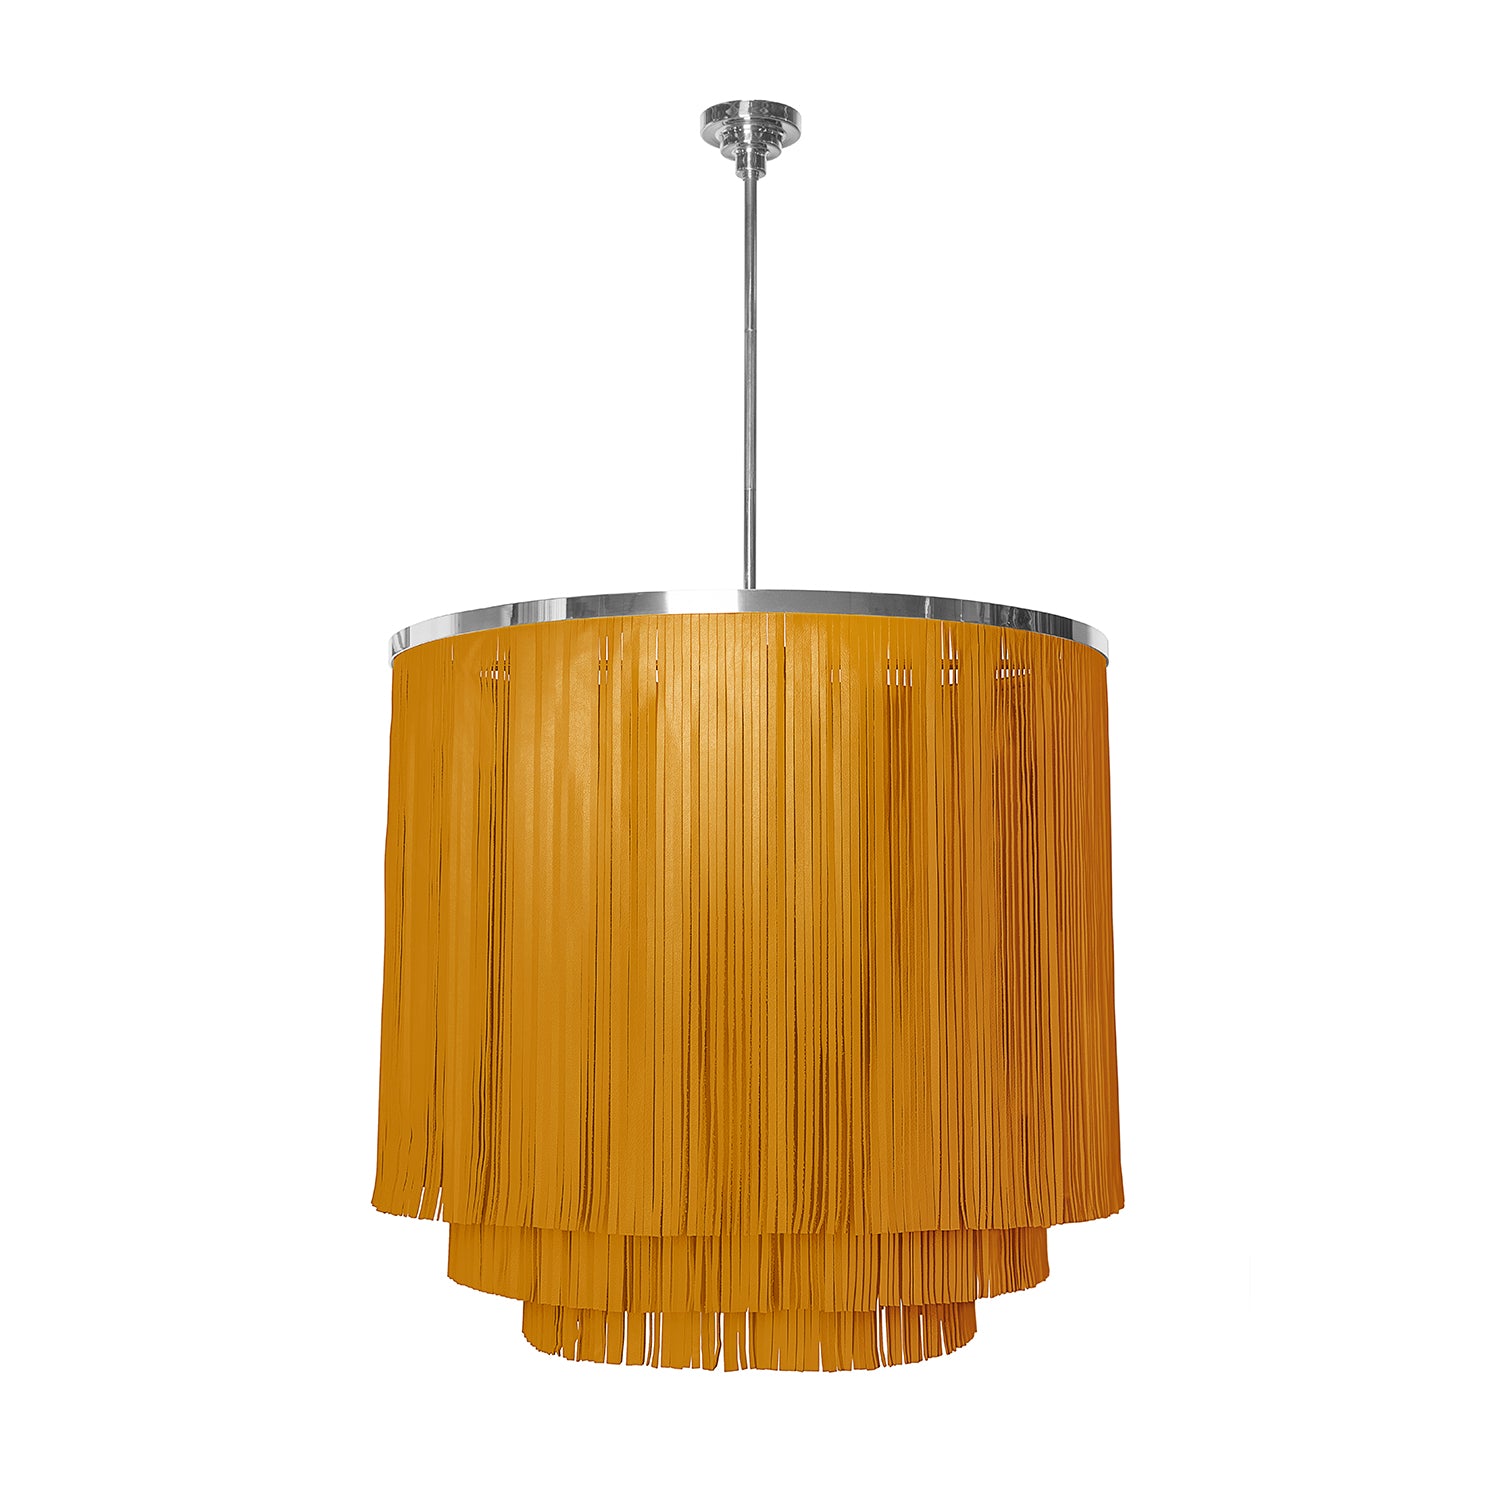 Large NeKeia Leather Chandelier in Nickel Finish and NeKeia Leather